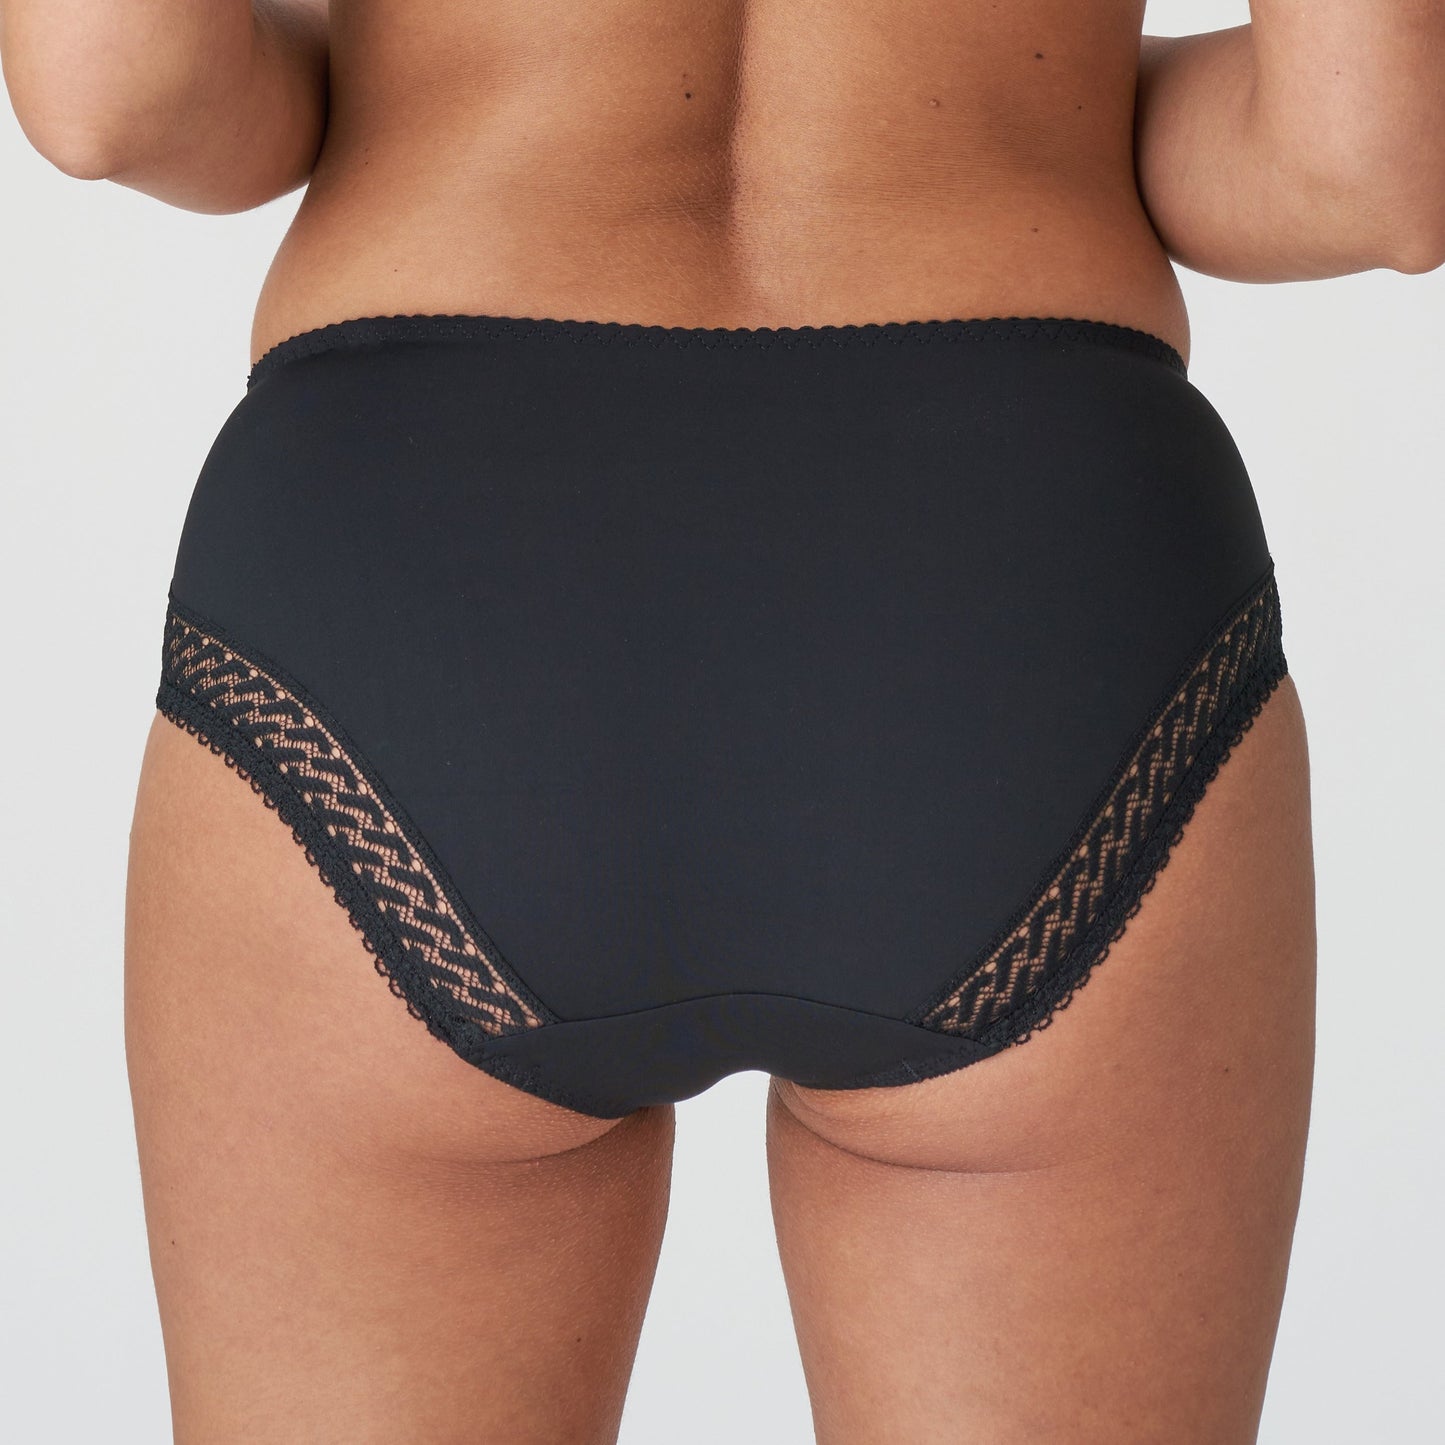 Back view of a woman wearing the Montara Full Brief panty in Black designed by PrimaDonna.